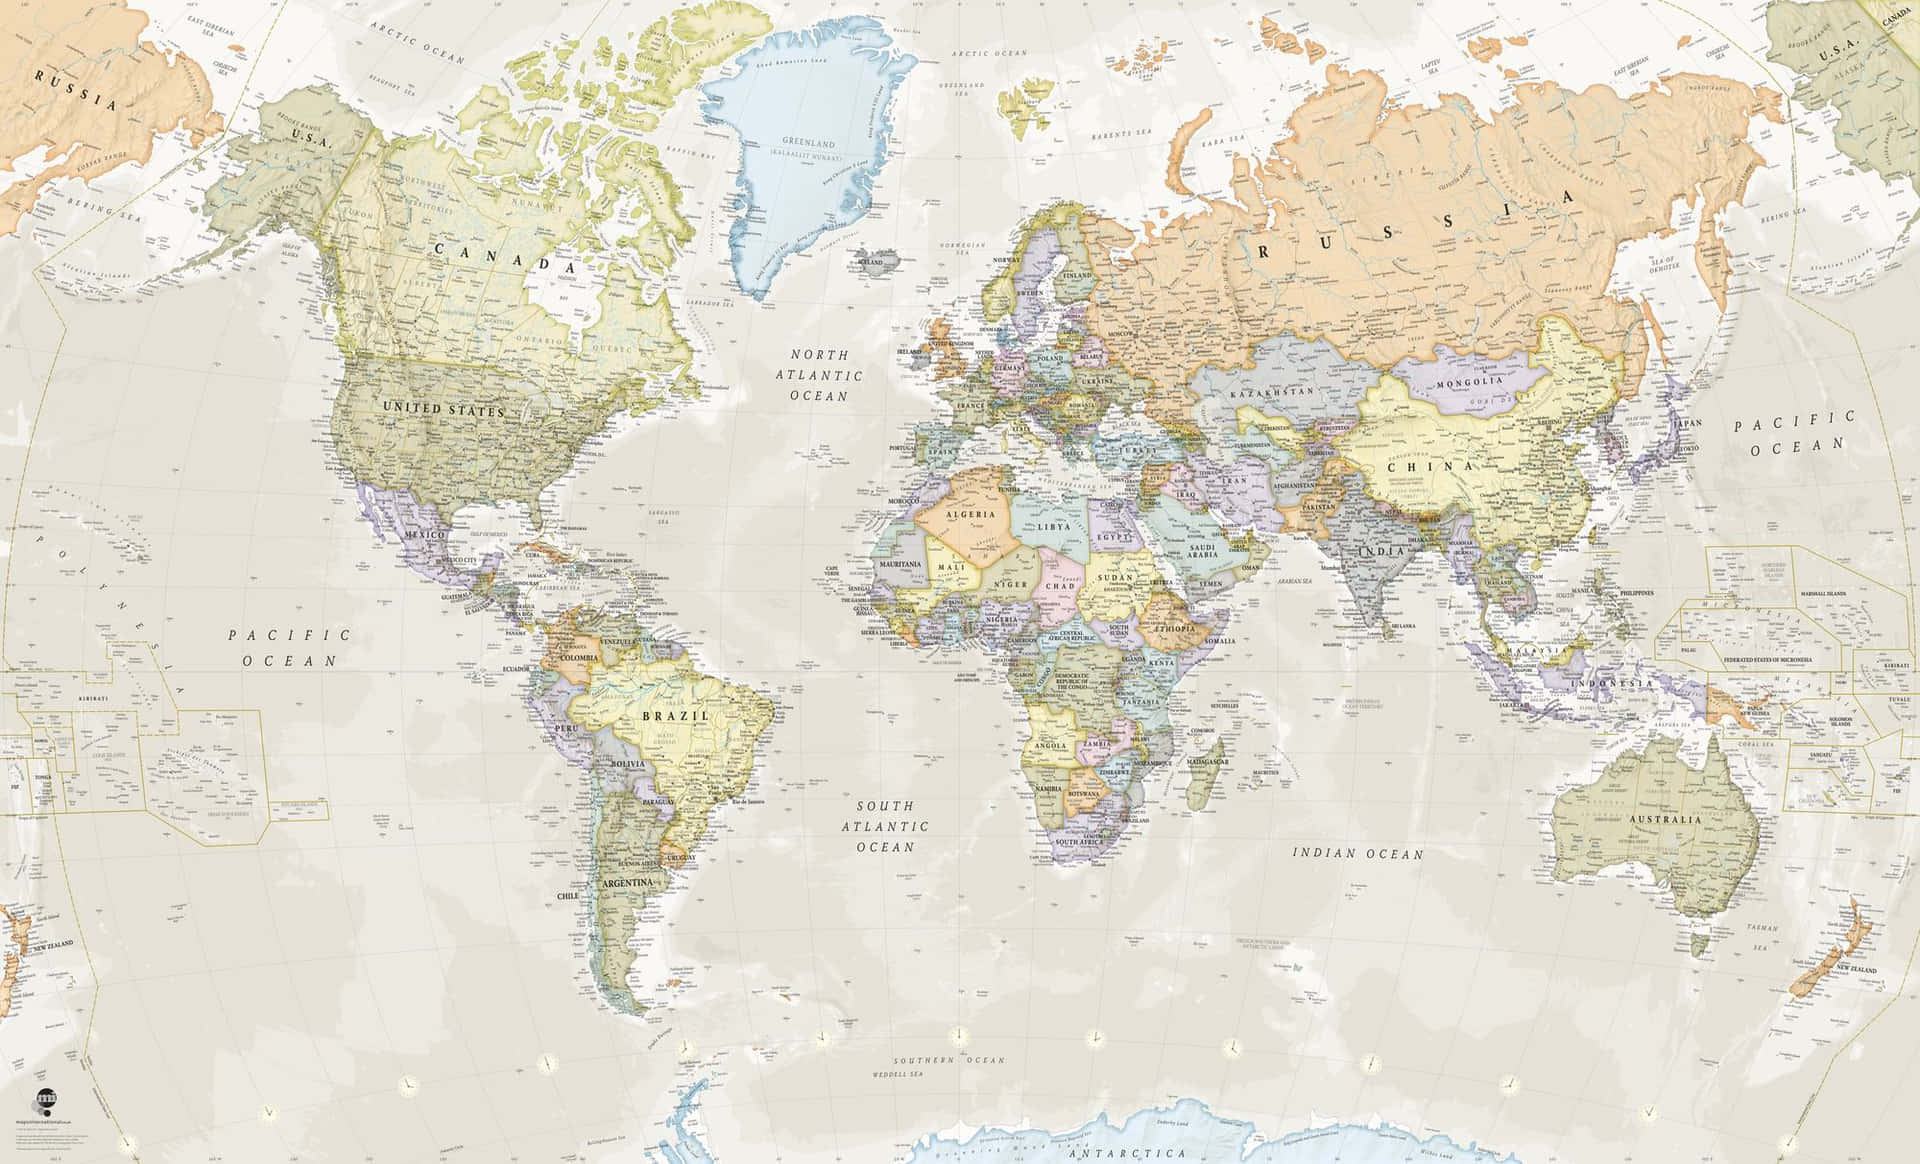 Explore the World of Maps